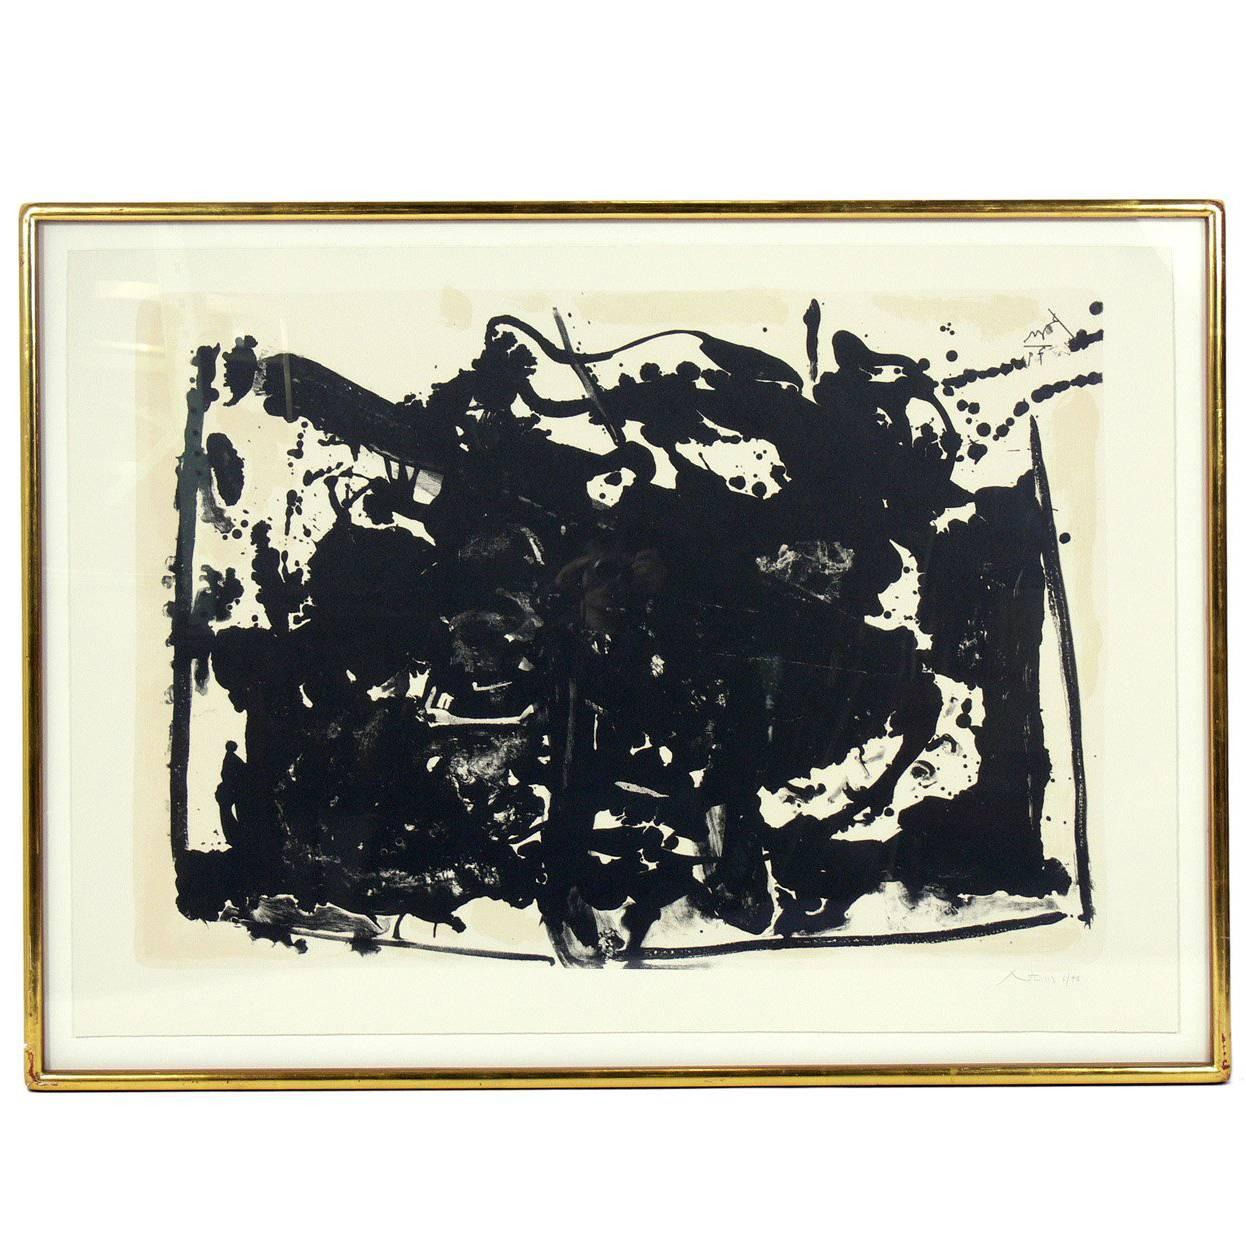 Large-Scale Abstract Lithograph La Guerra II by Robert Motherwell